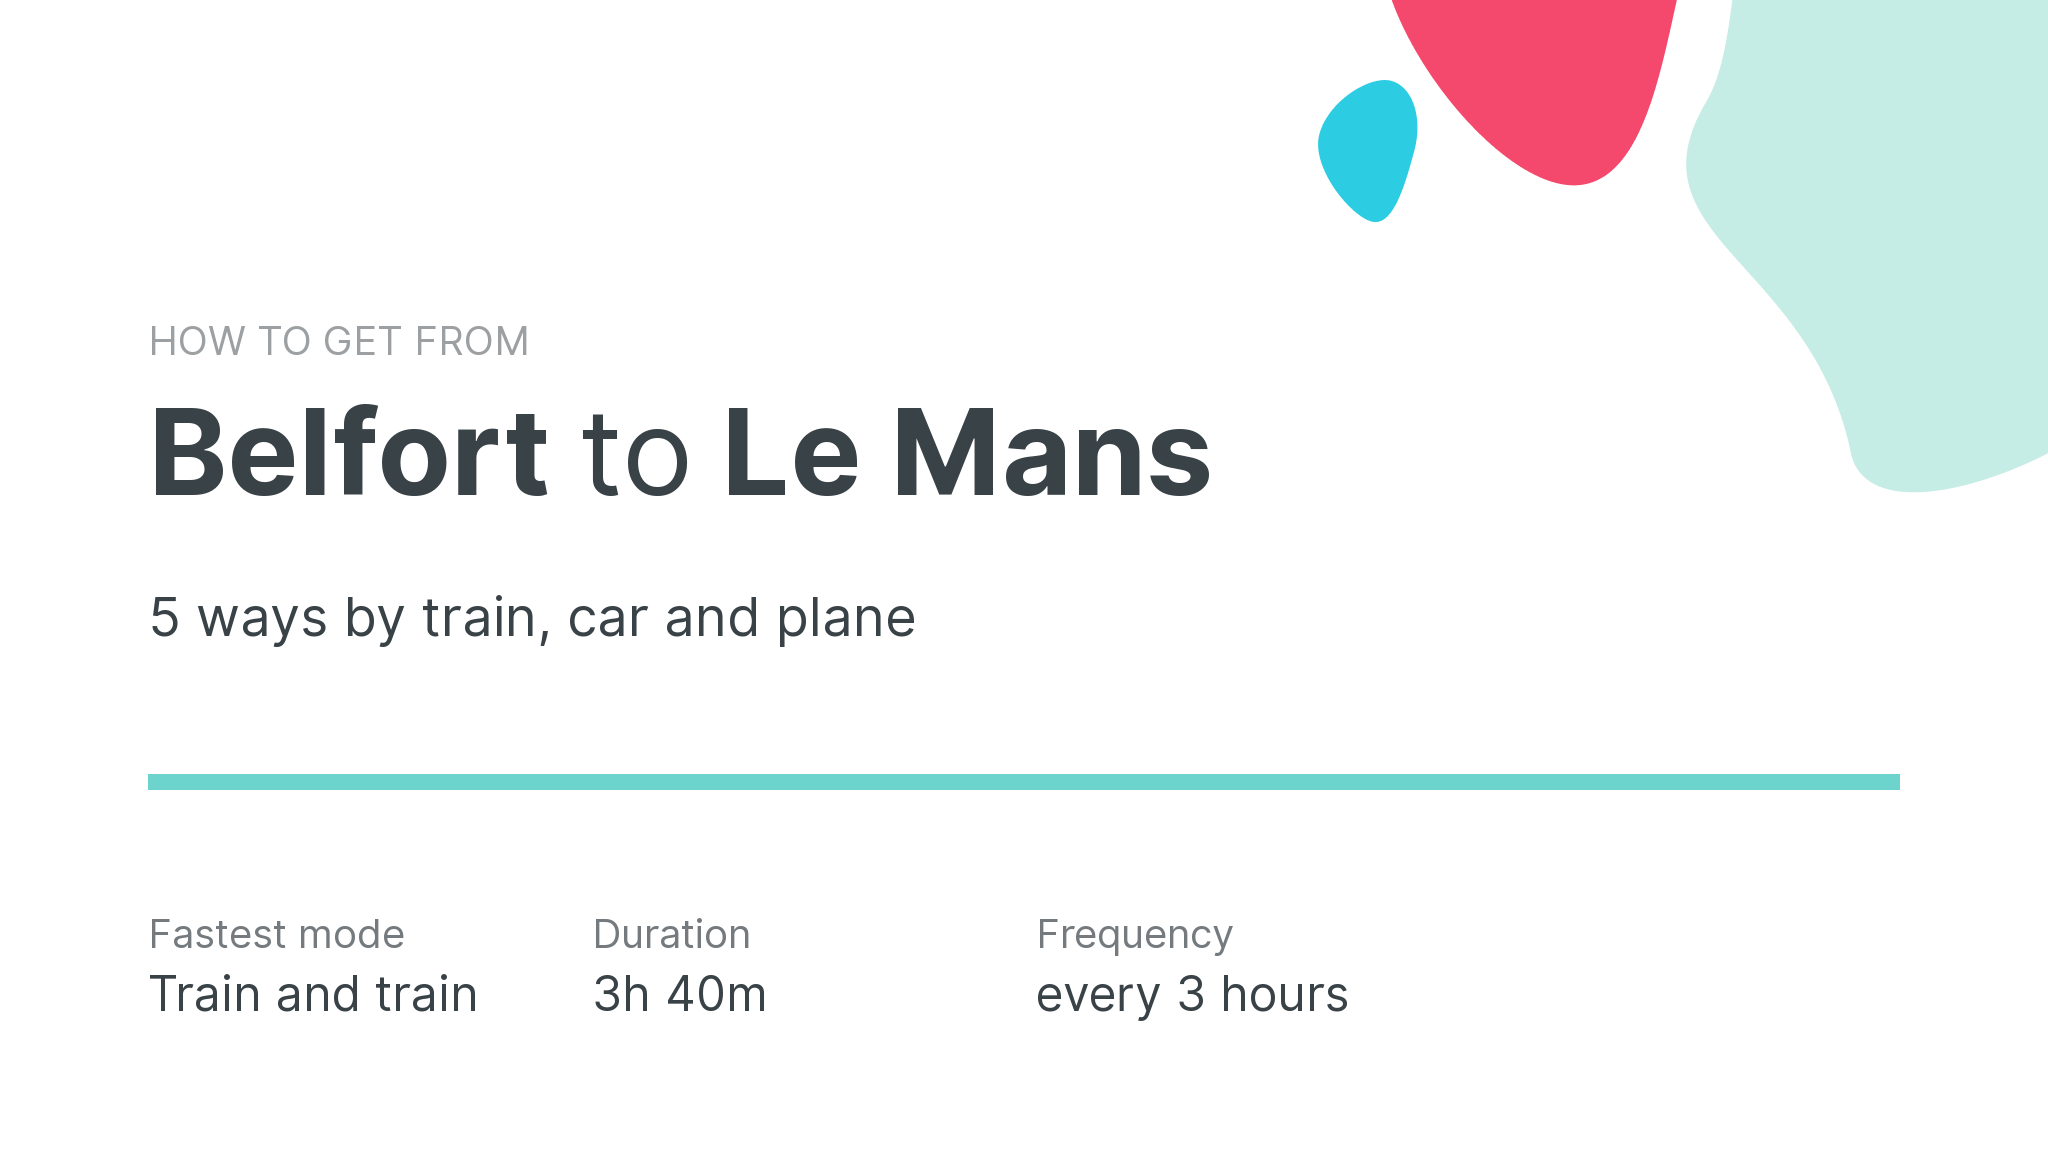 How do I get from Belfort to Le Mans